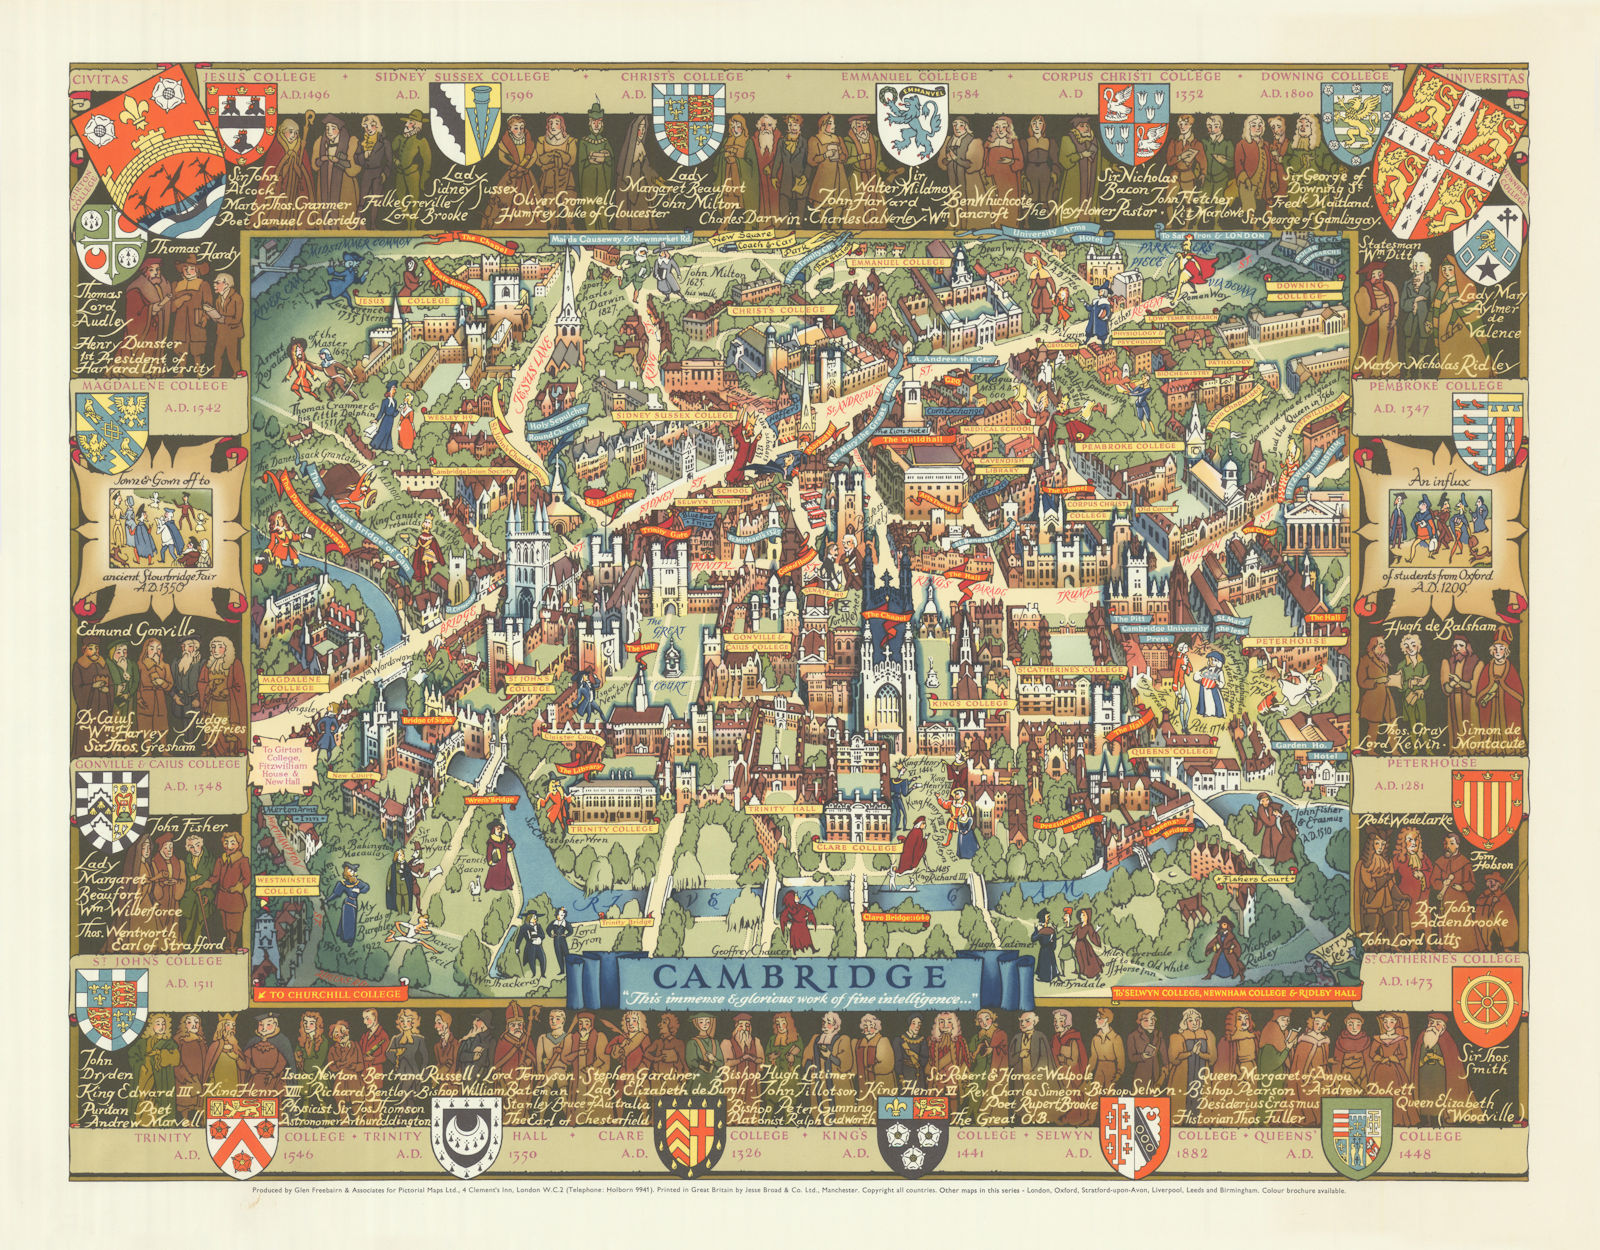 Cambridge "This immense & glorious work…" pictorial map by Kerry Lee 1948